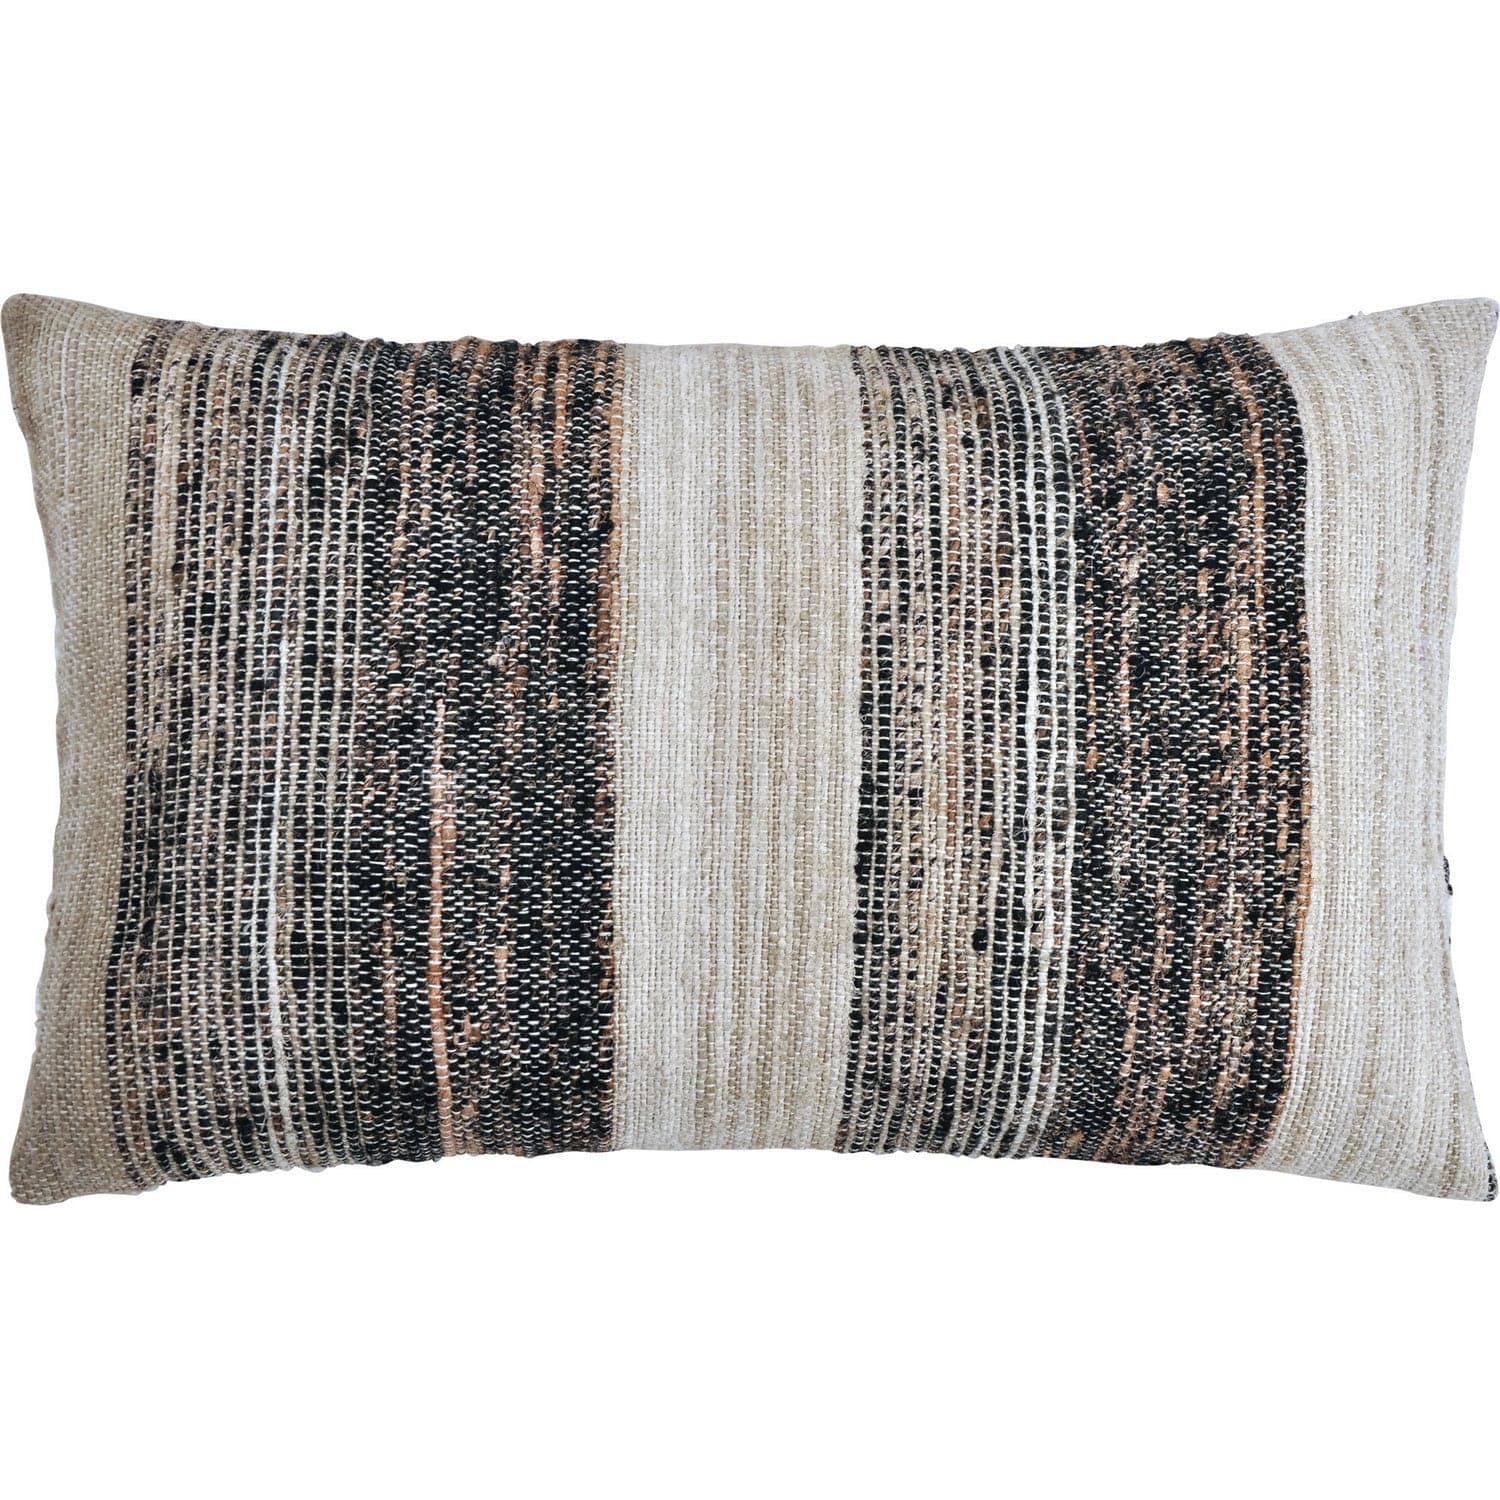 Renwil - PWFL1308 - Home Accents - Rugs/Pillows/Blankets